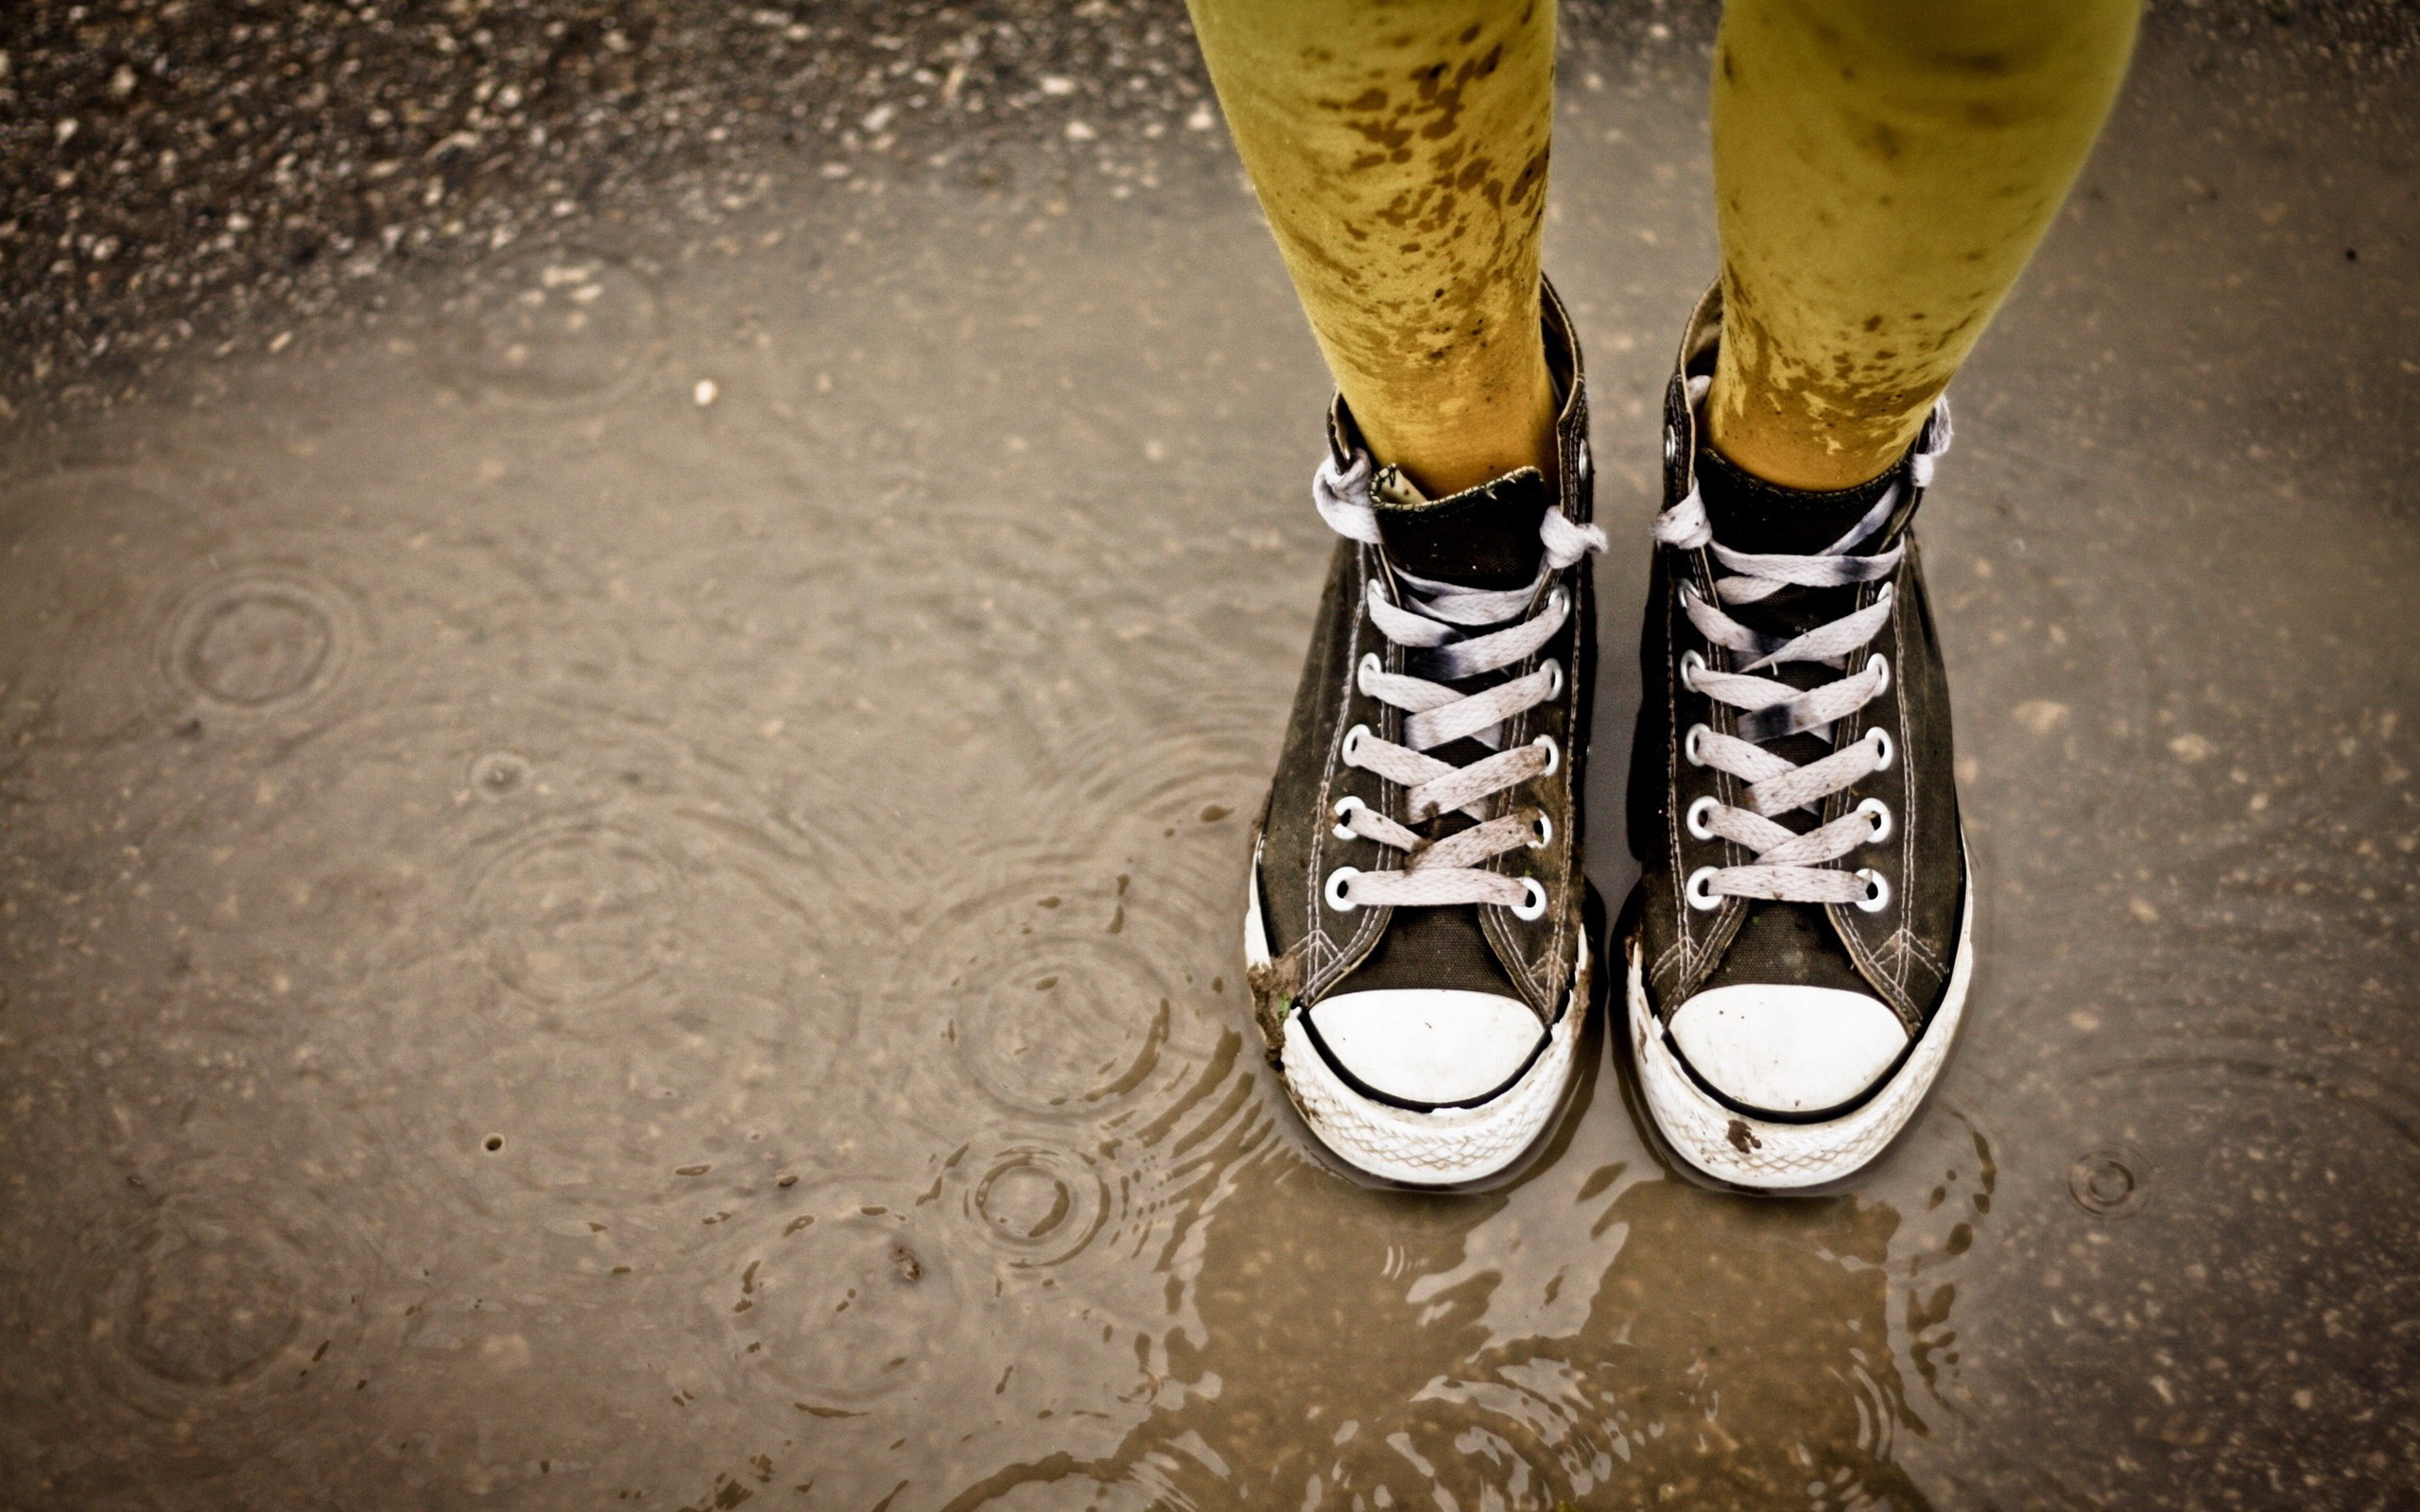 Converse Product Puddle Shoe Sneakers 2560x1600